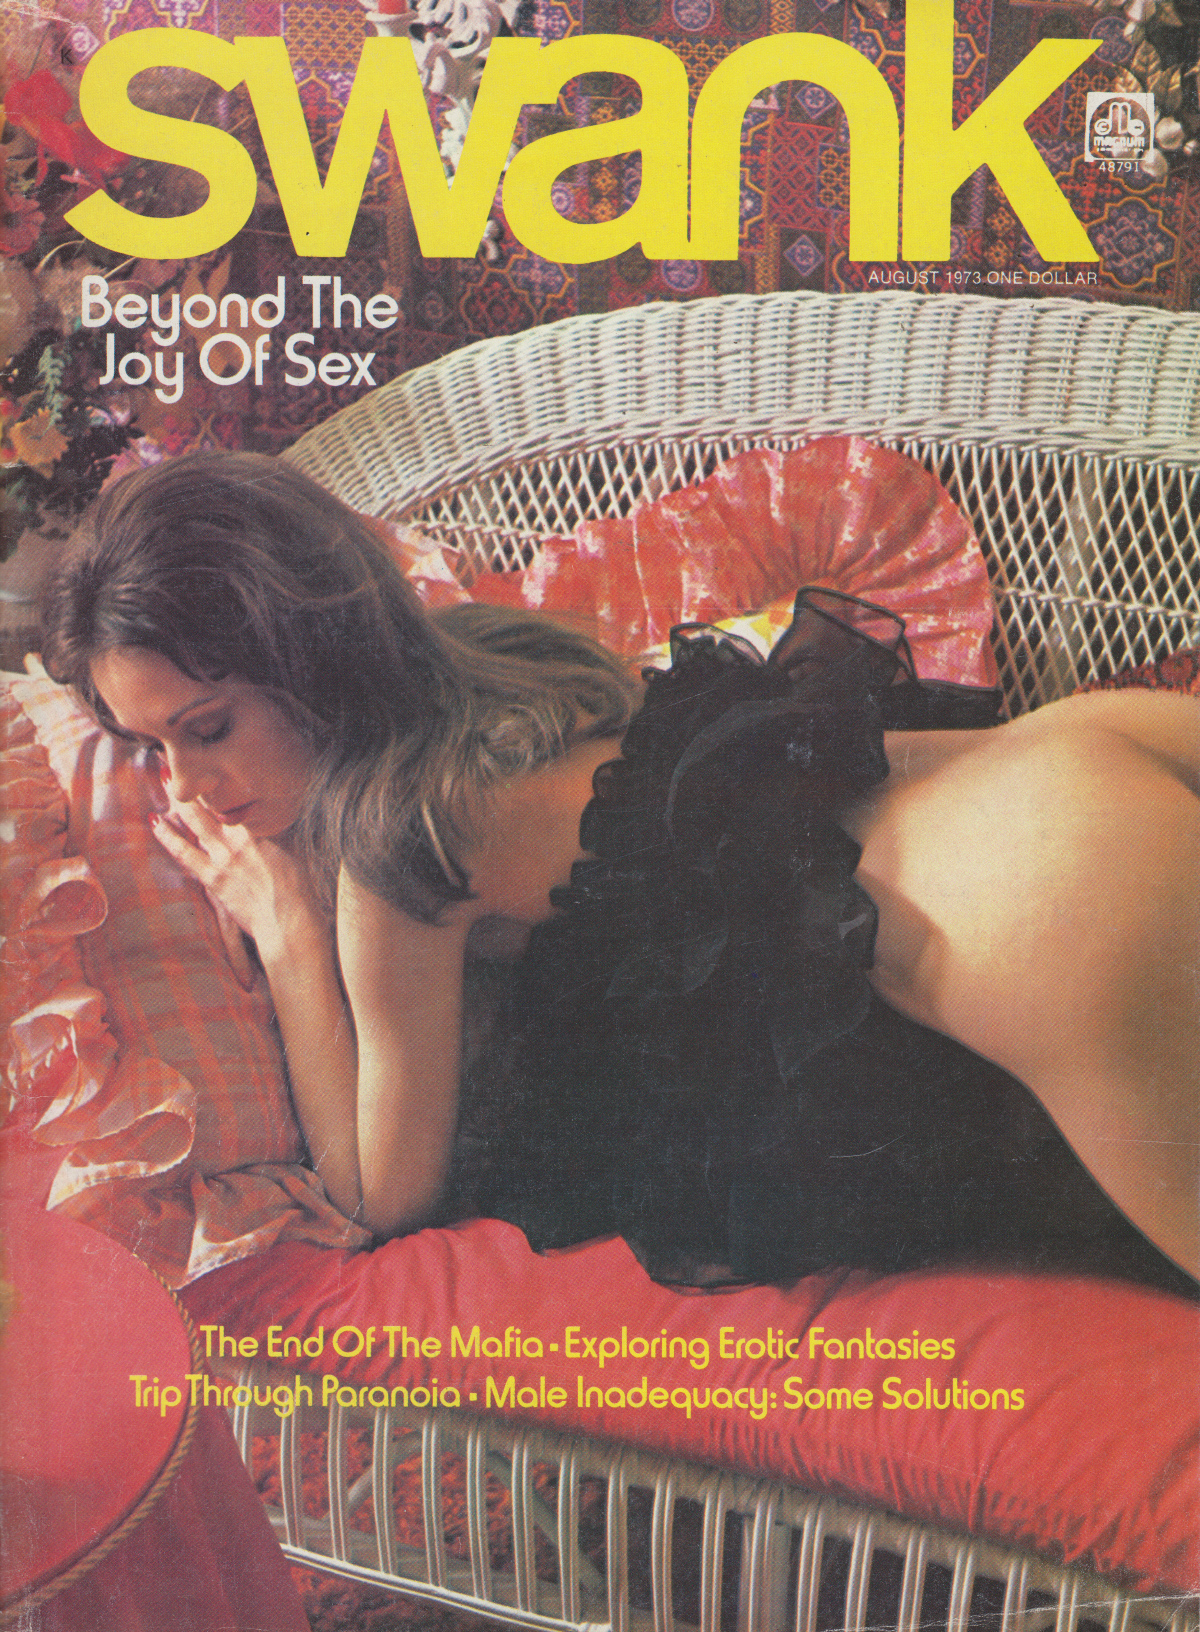 Swank August 1973 magazine back issue Swank magizine back copy Swank August 1973 Adult Pornographic Magazine Back Issue Published by Magna Publishing Group. Beyond The Joy Of Sex.